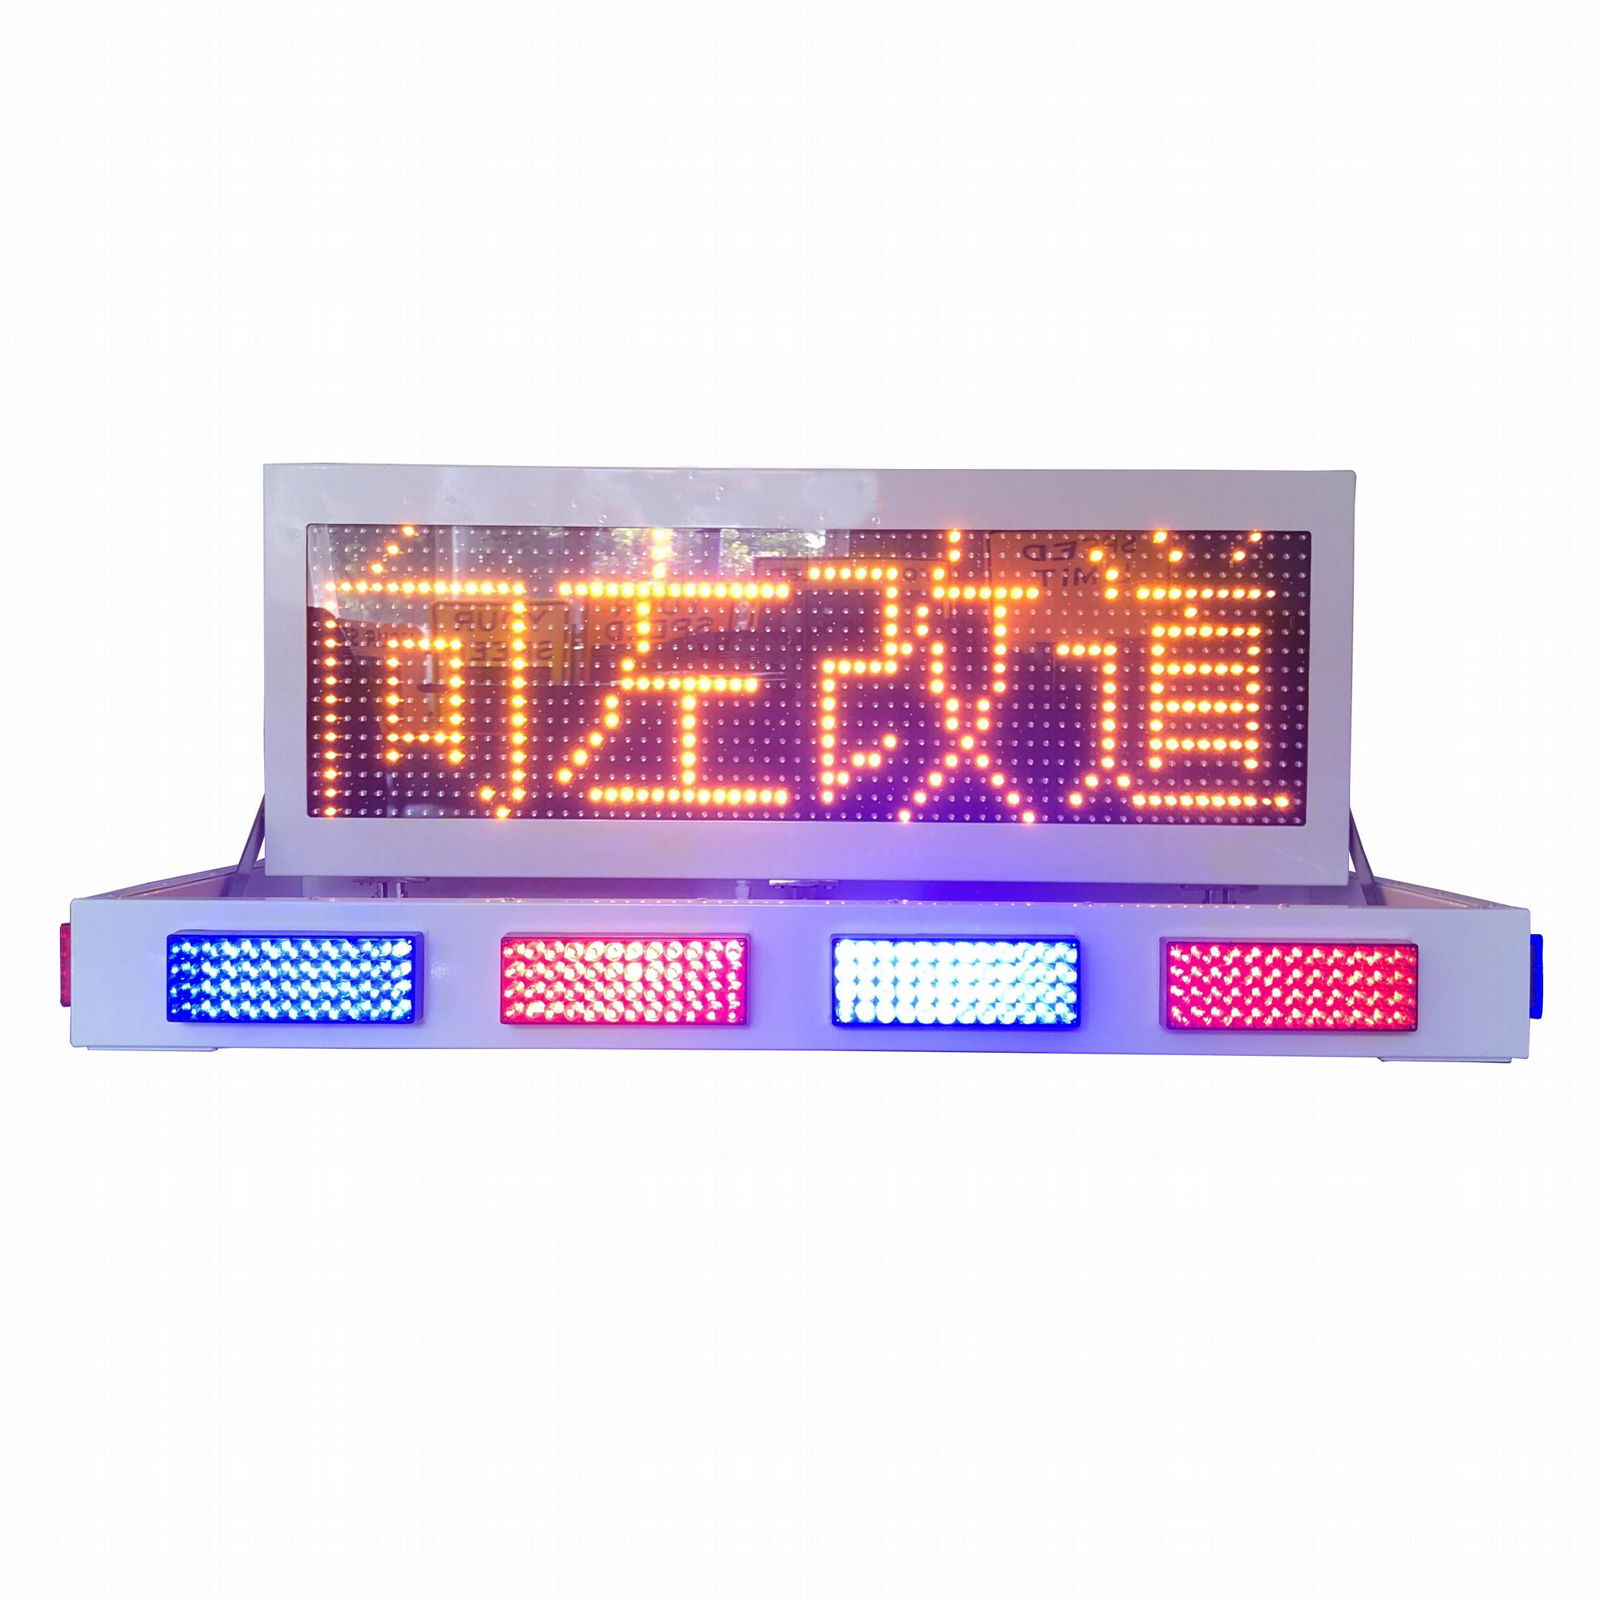 Vechicle mounted LED sign